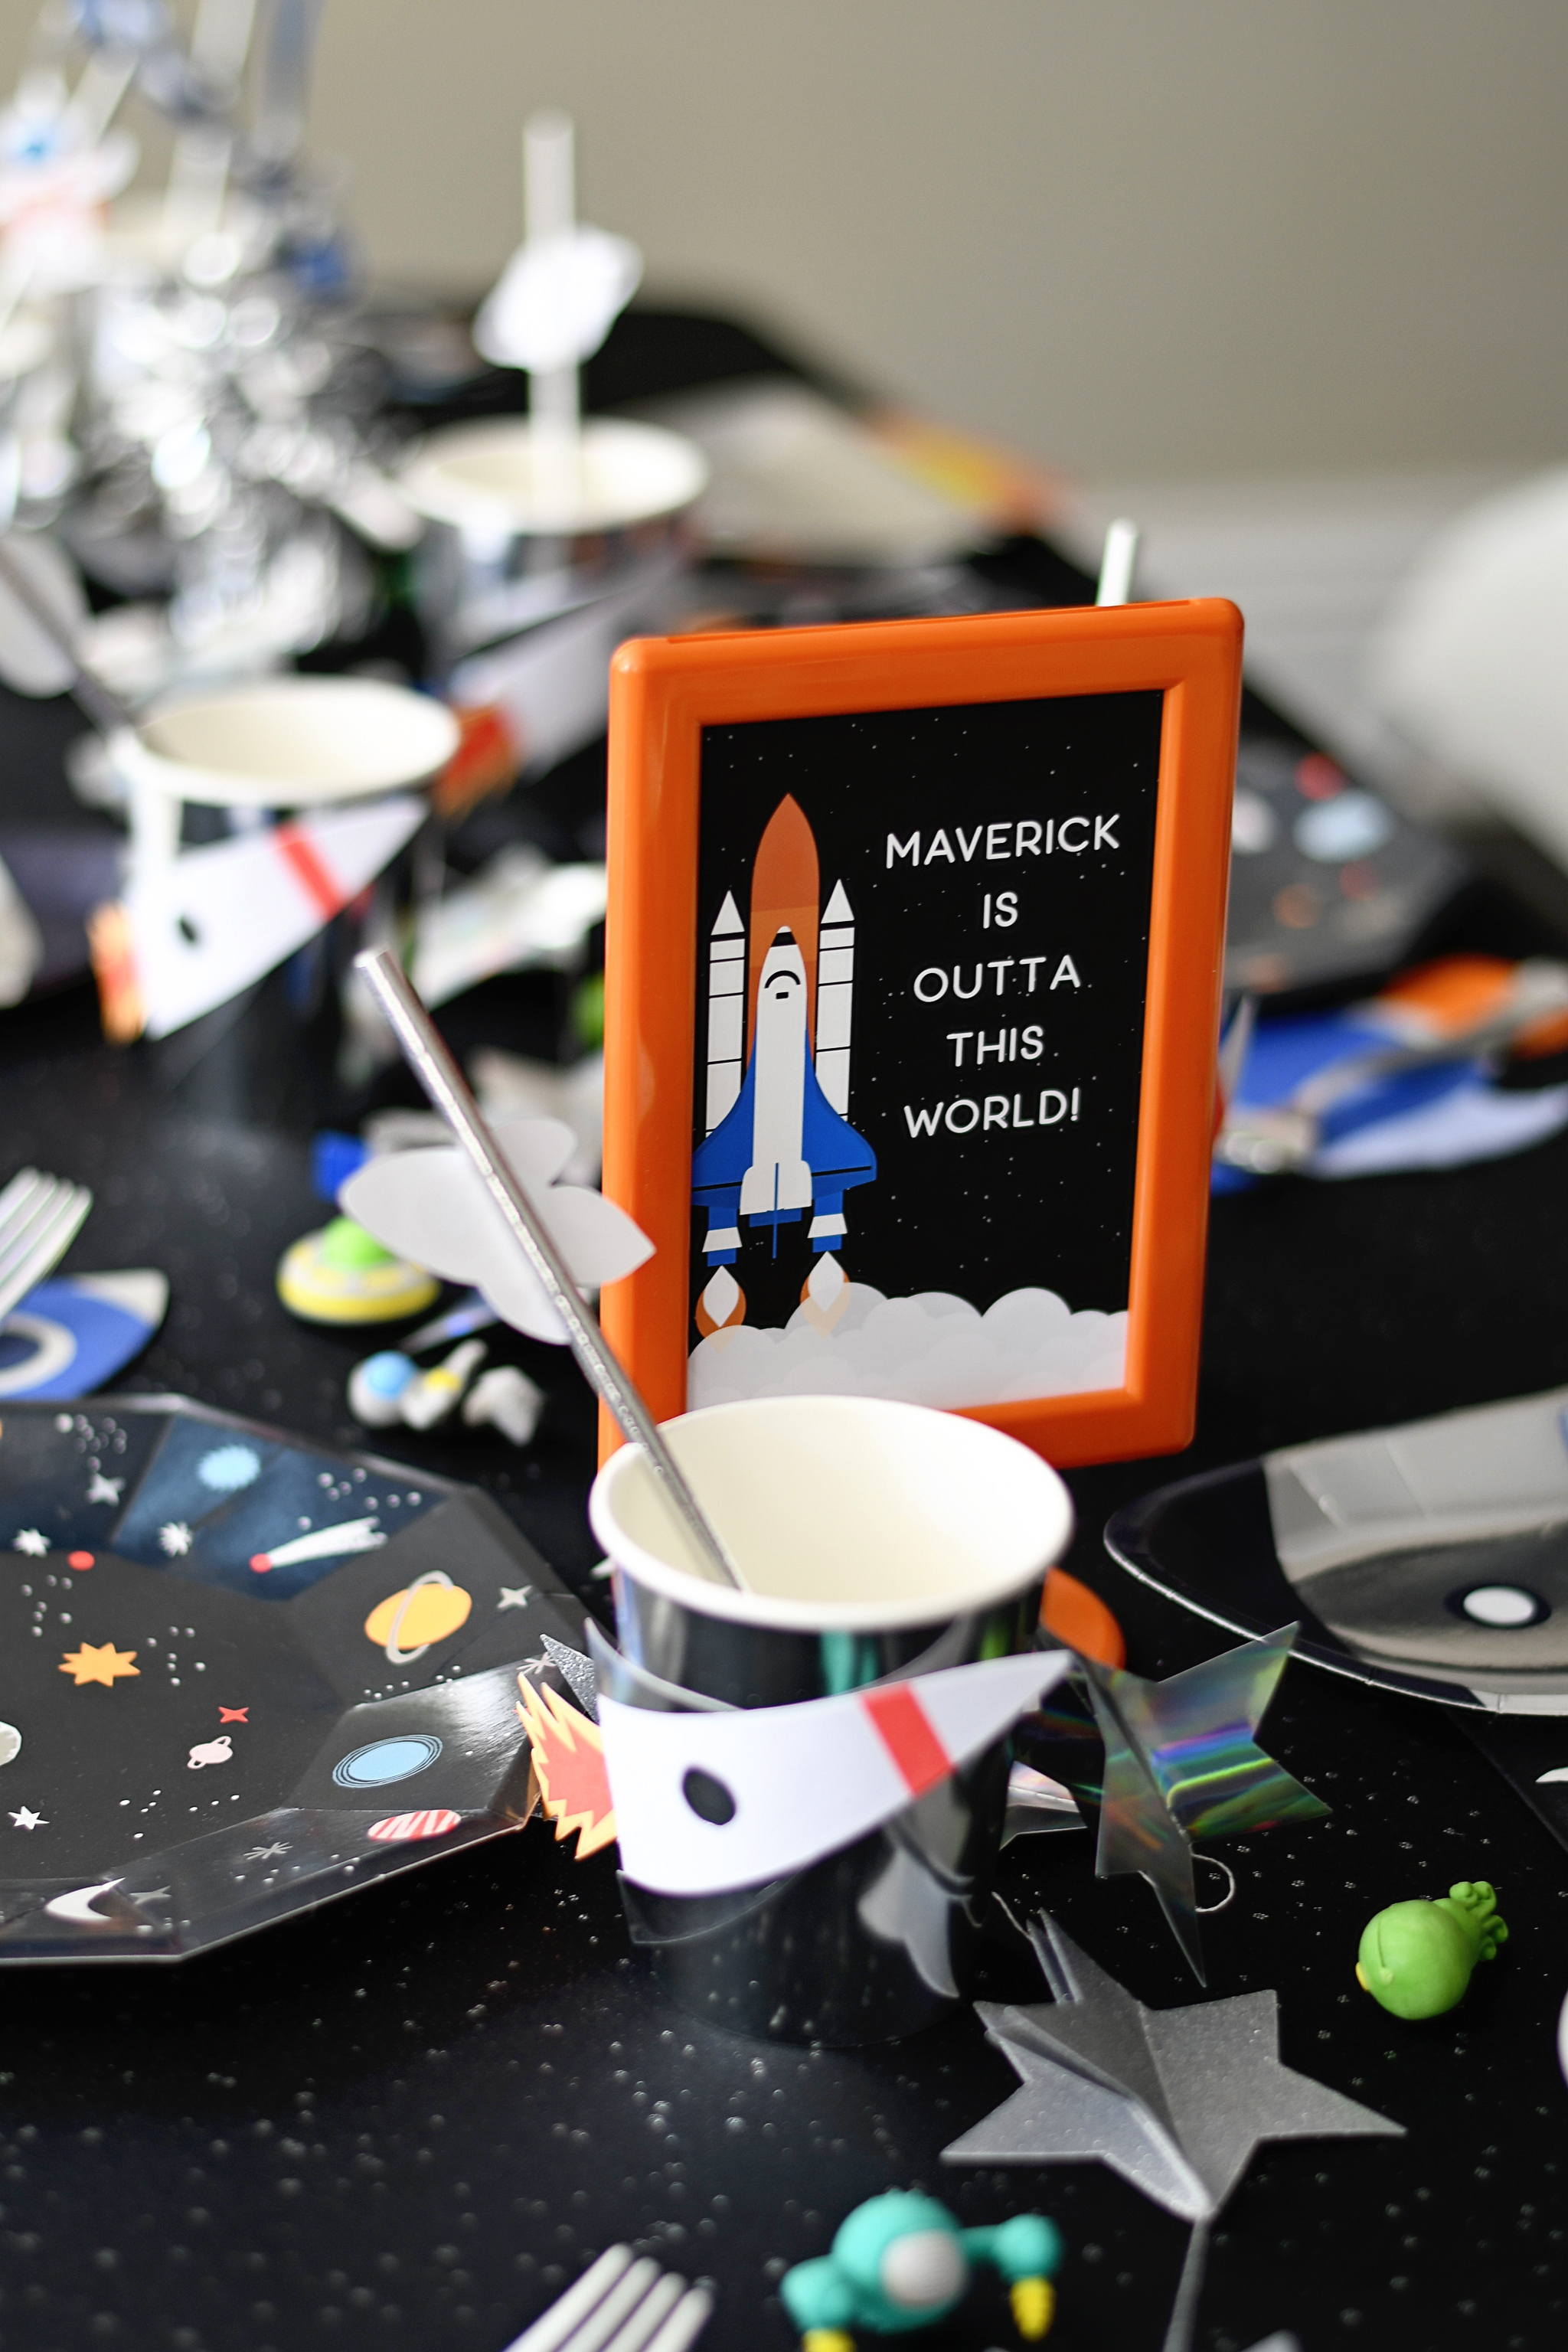 Custom birthday sign - This birthday party is outta this world!